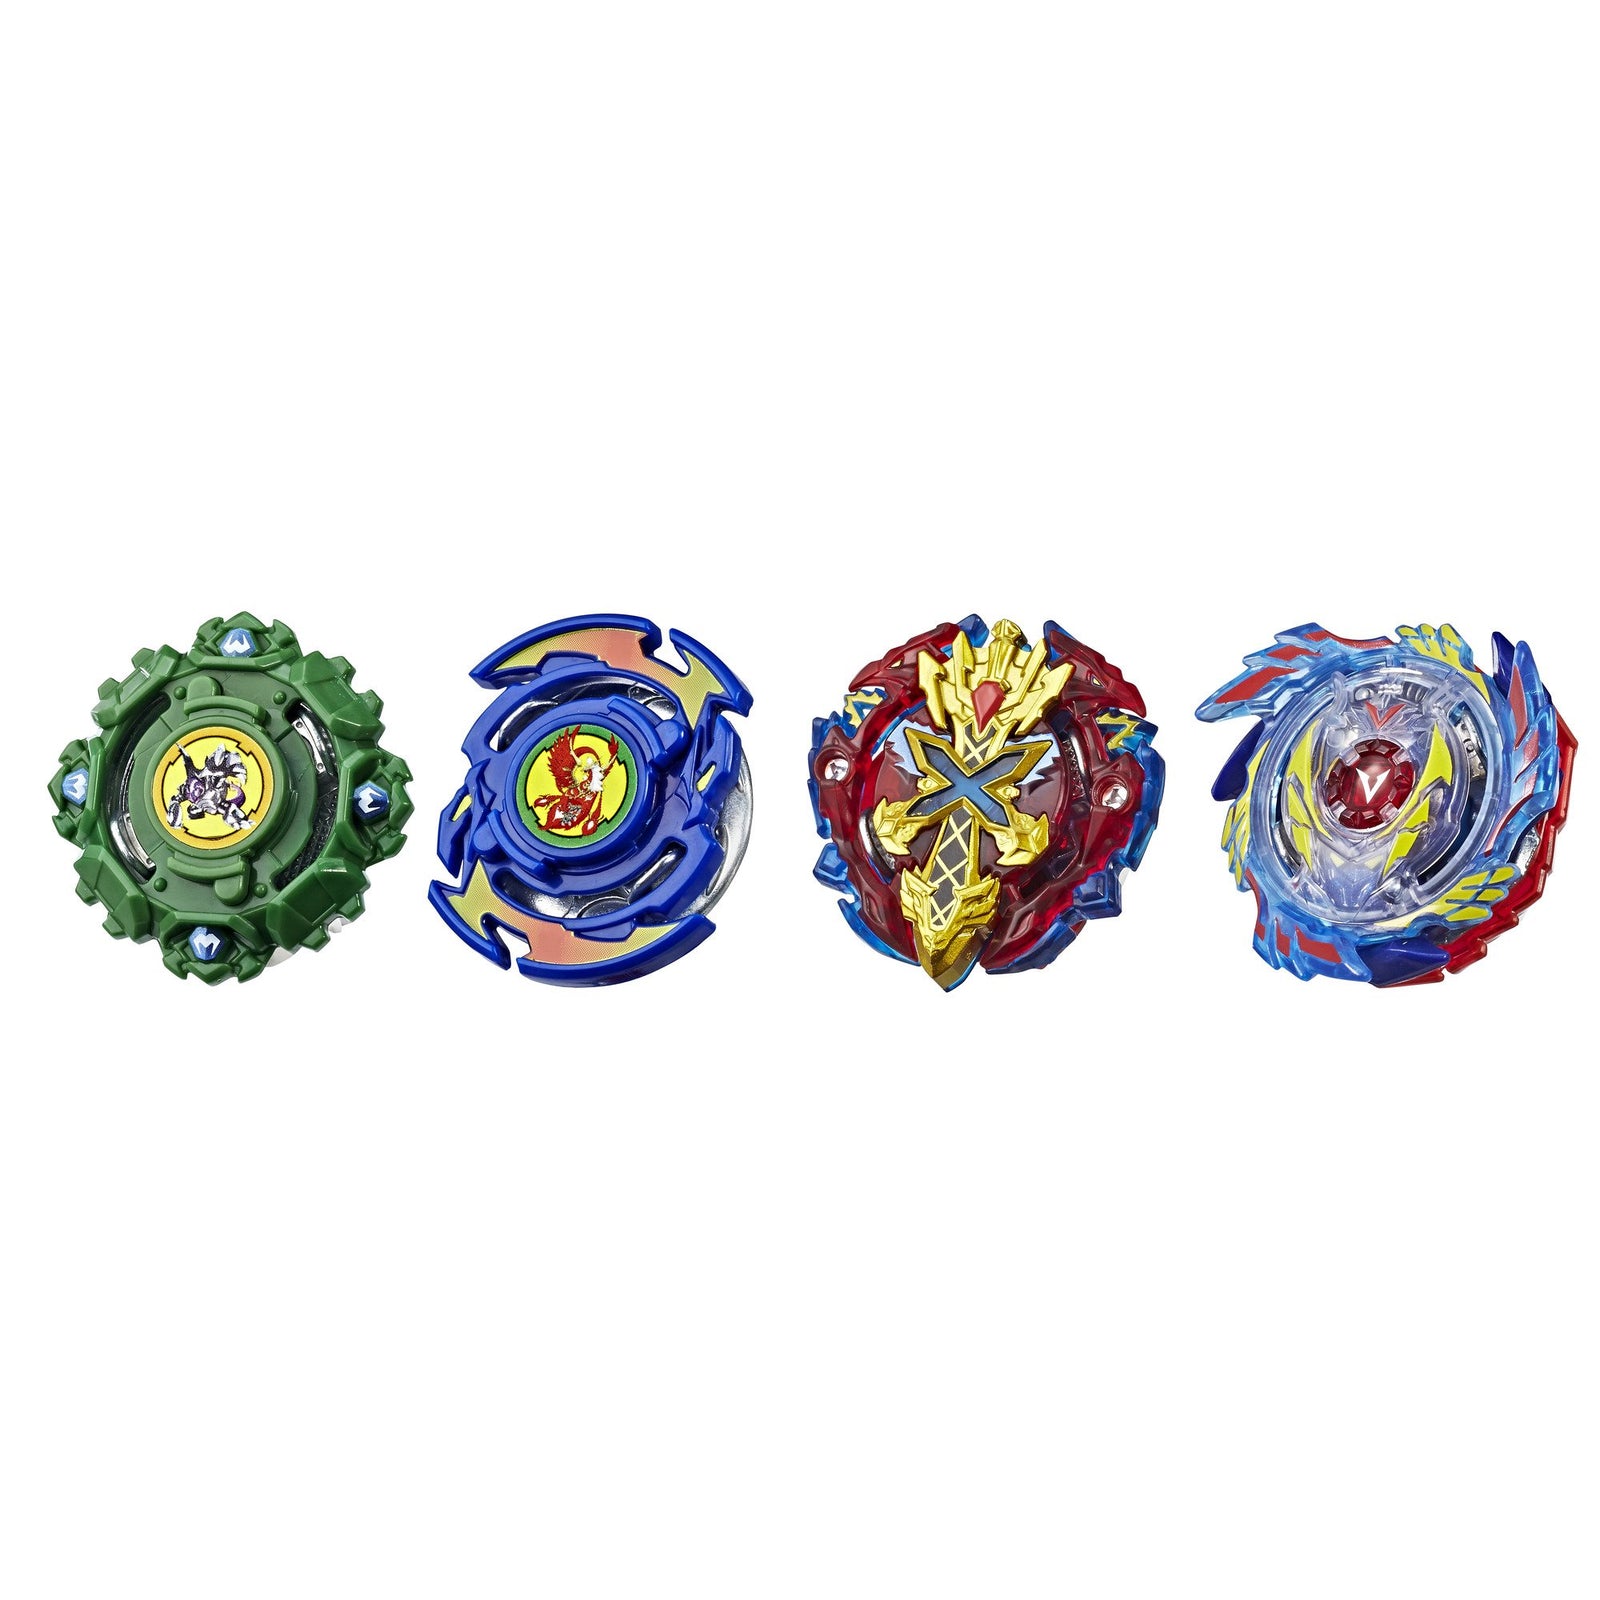 Beyblade Burst Evolution Elite Warrior 4-Pack - 4 Iconic Right-Spin Battling Tops, Game ((Amazon Exclusive)